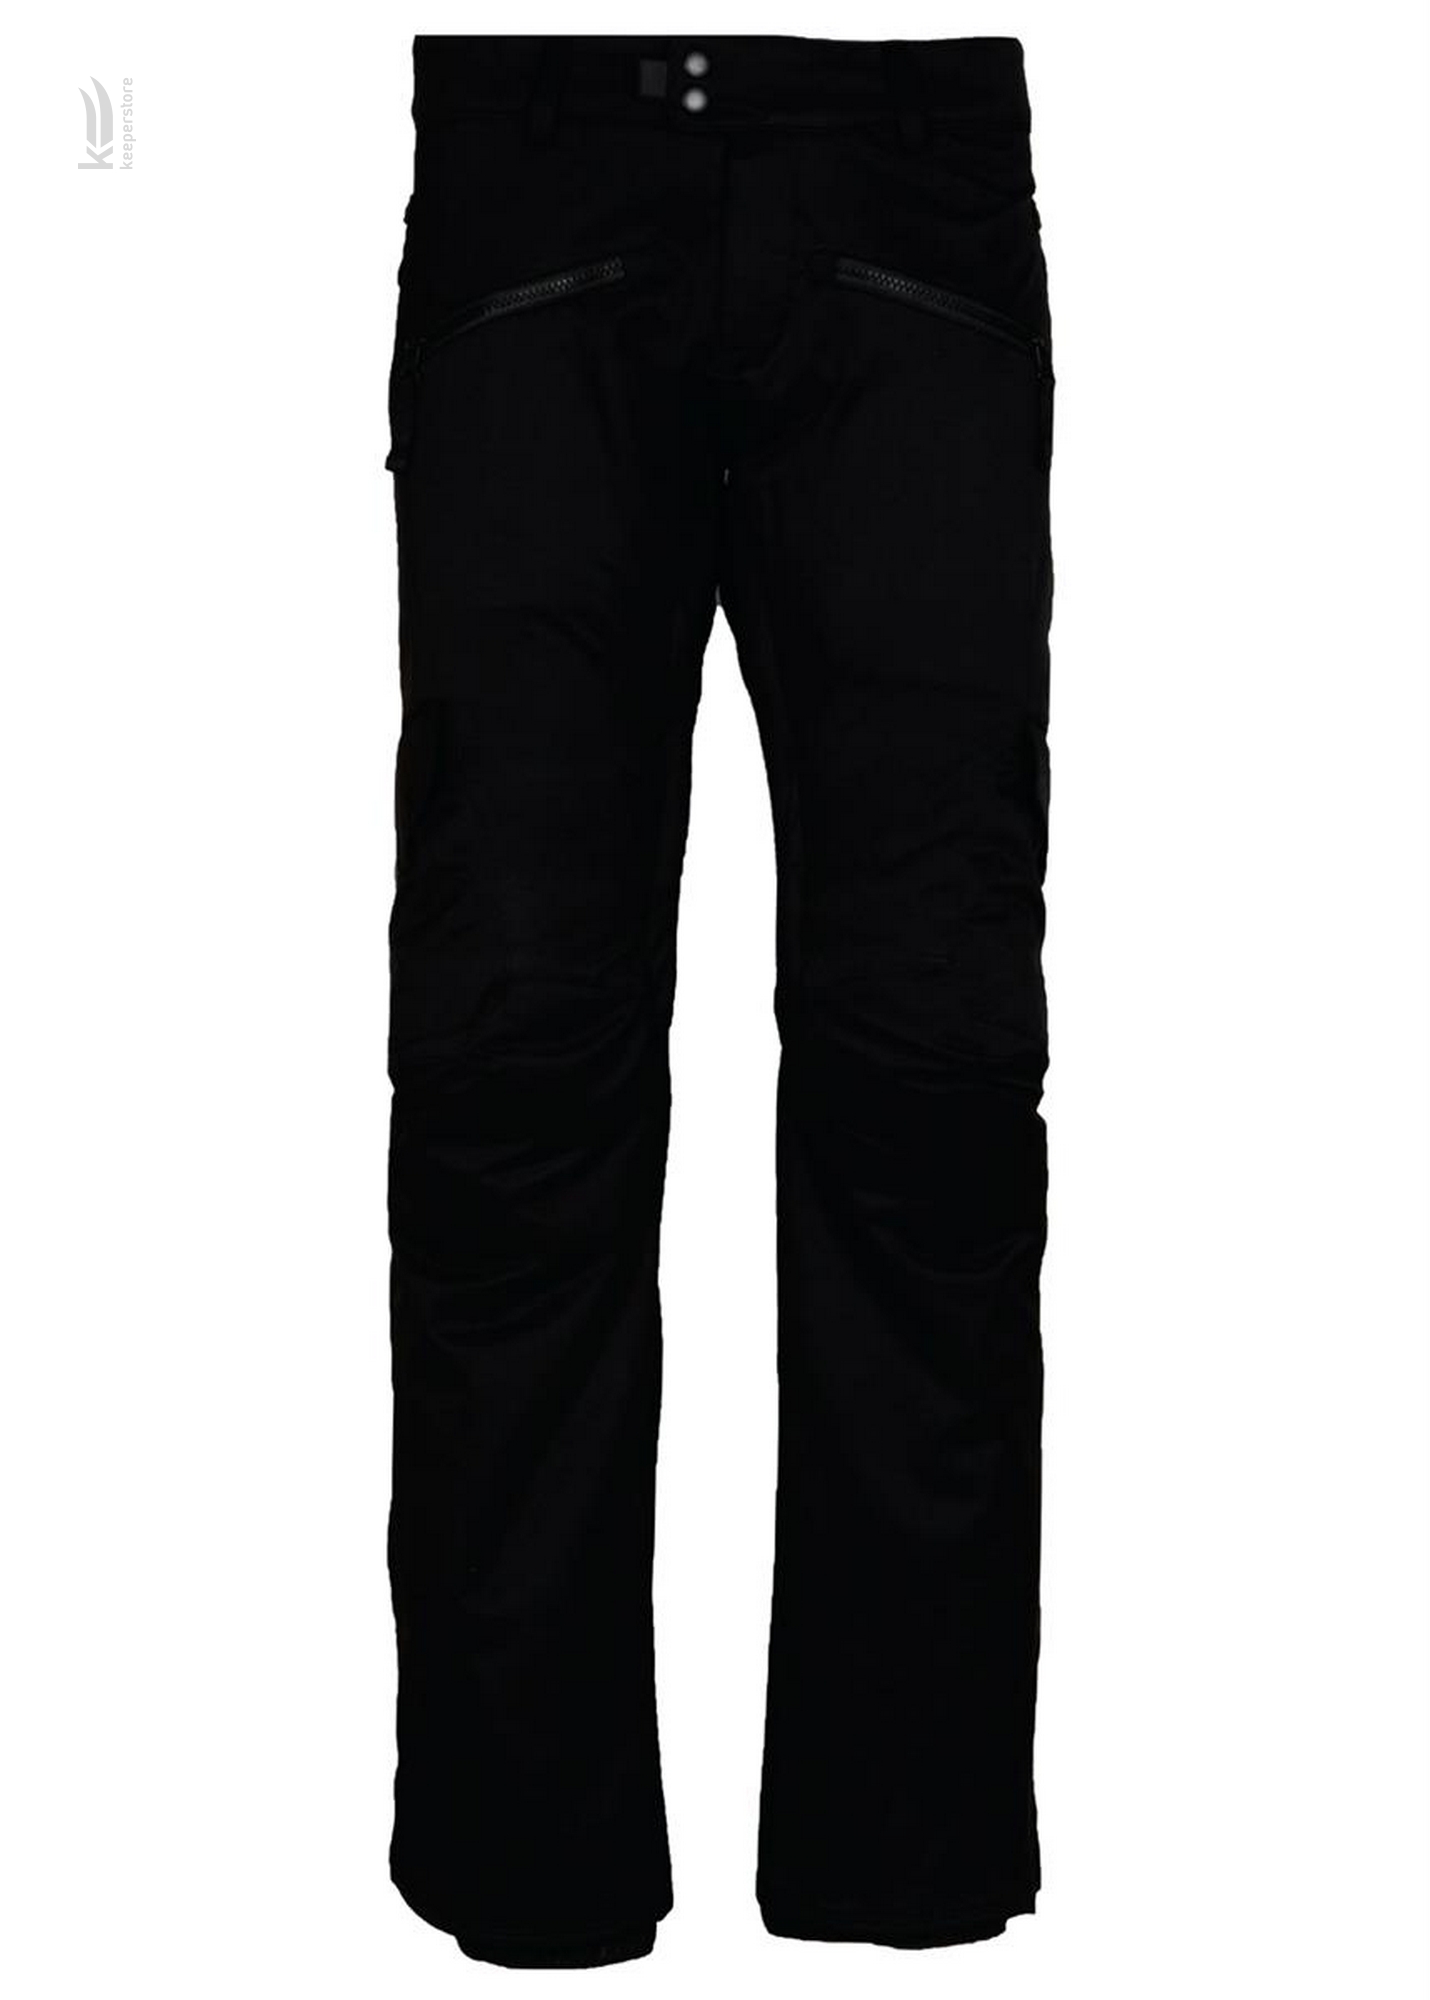 686 Authentic Mistress Insulated Pant Black Jade (S)